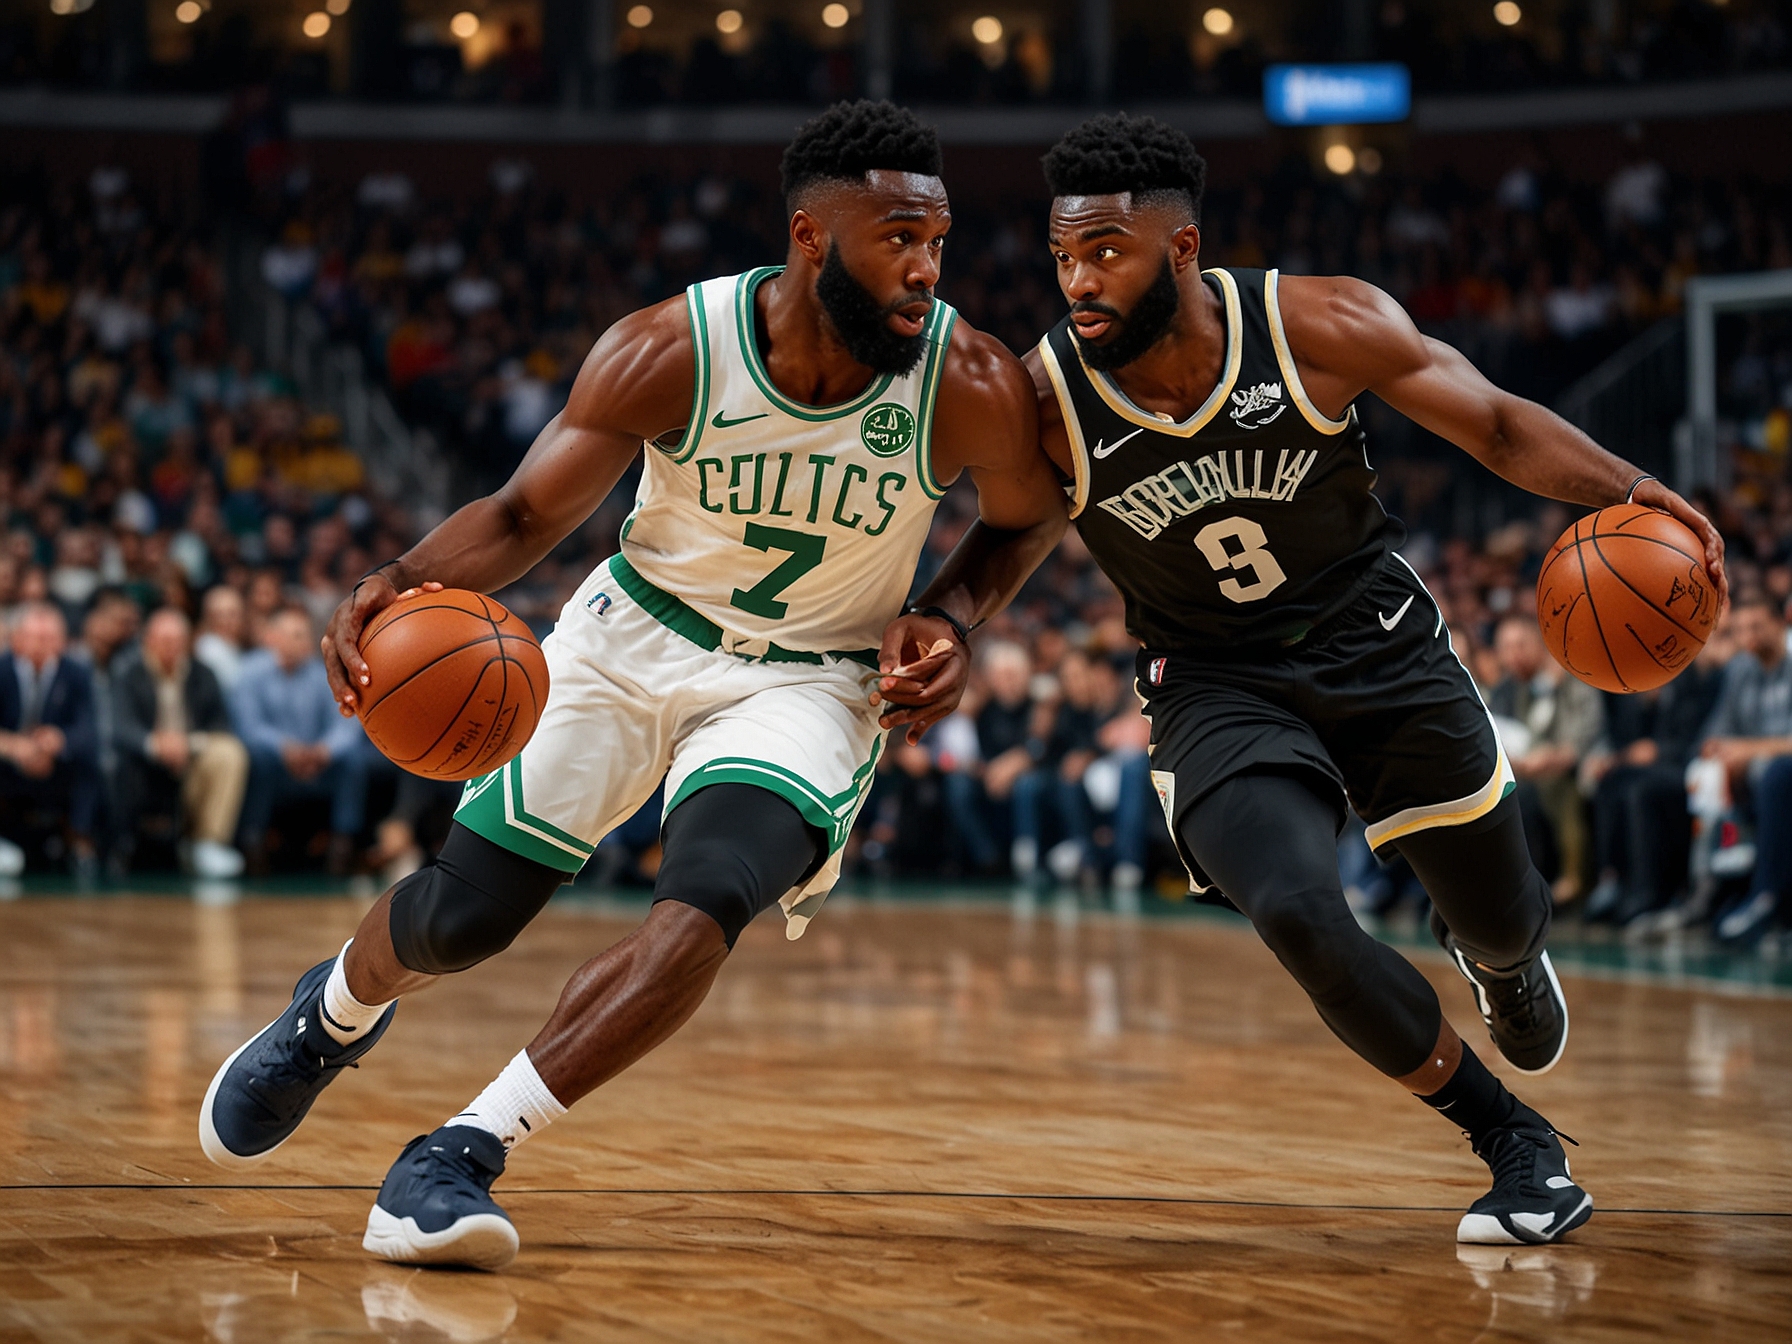 Jaylen Brown dribbling past a defender while making a crucial play in the 2024 NBA Finals. His intense focus and athleticism are evident, showcasing his MVP-worthy abilities.